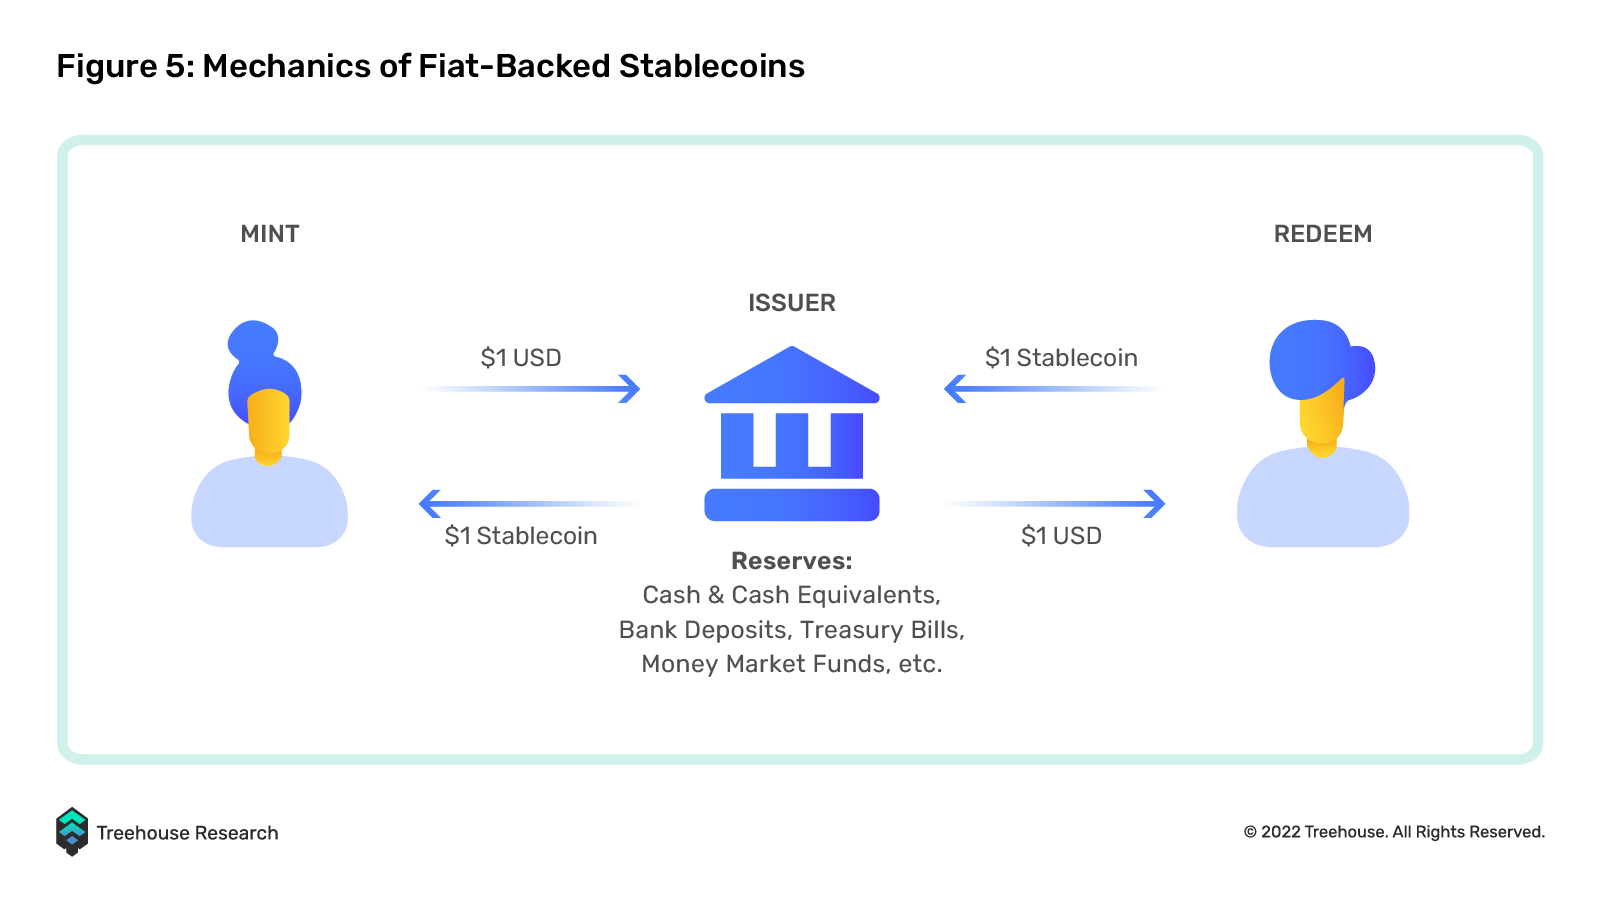 mechanics of fiat-backed stablecoins